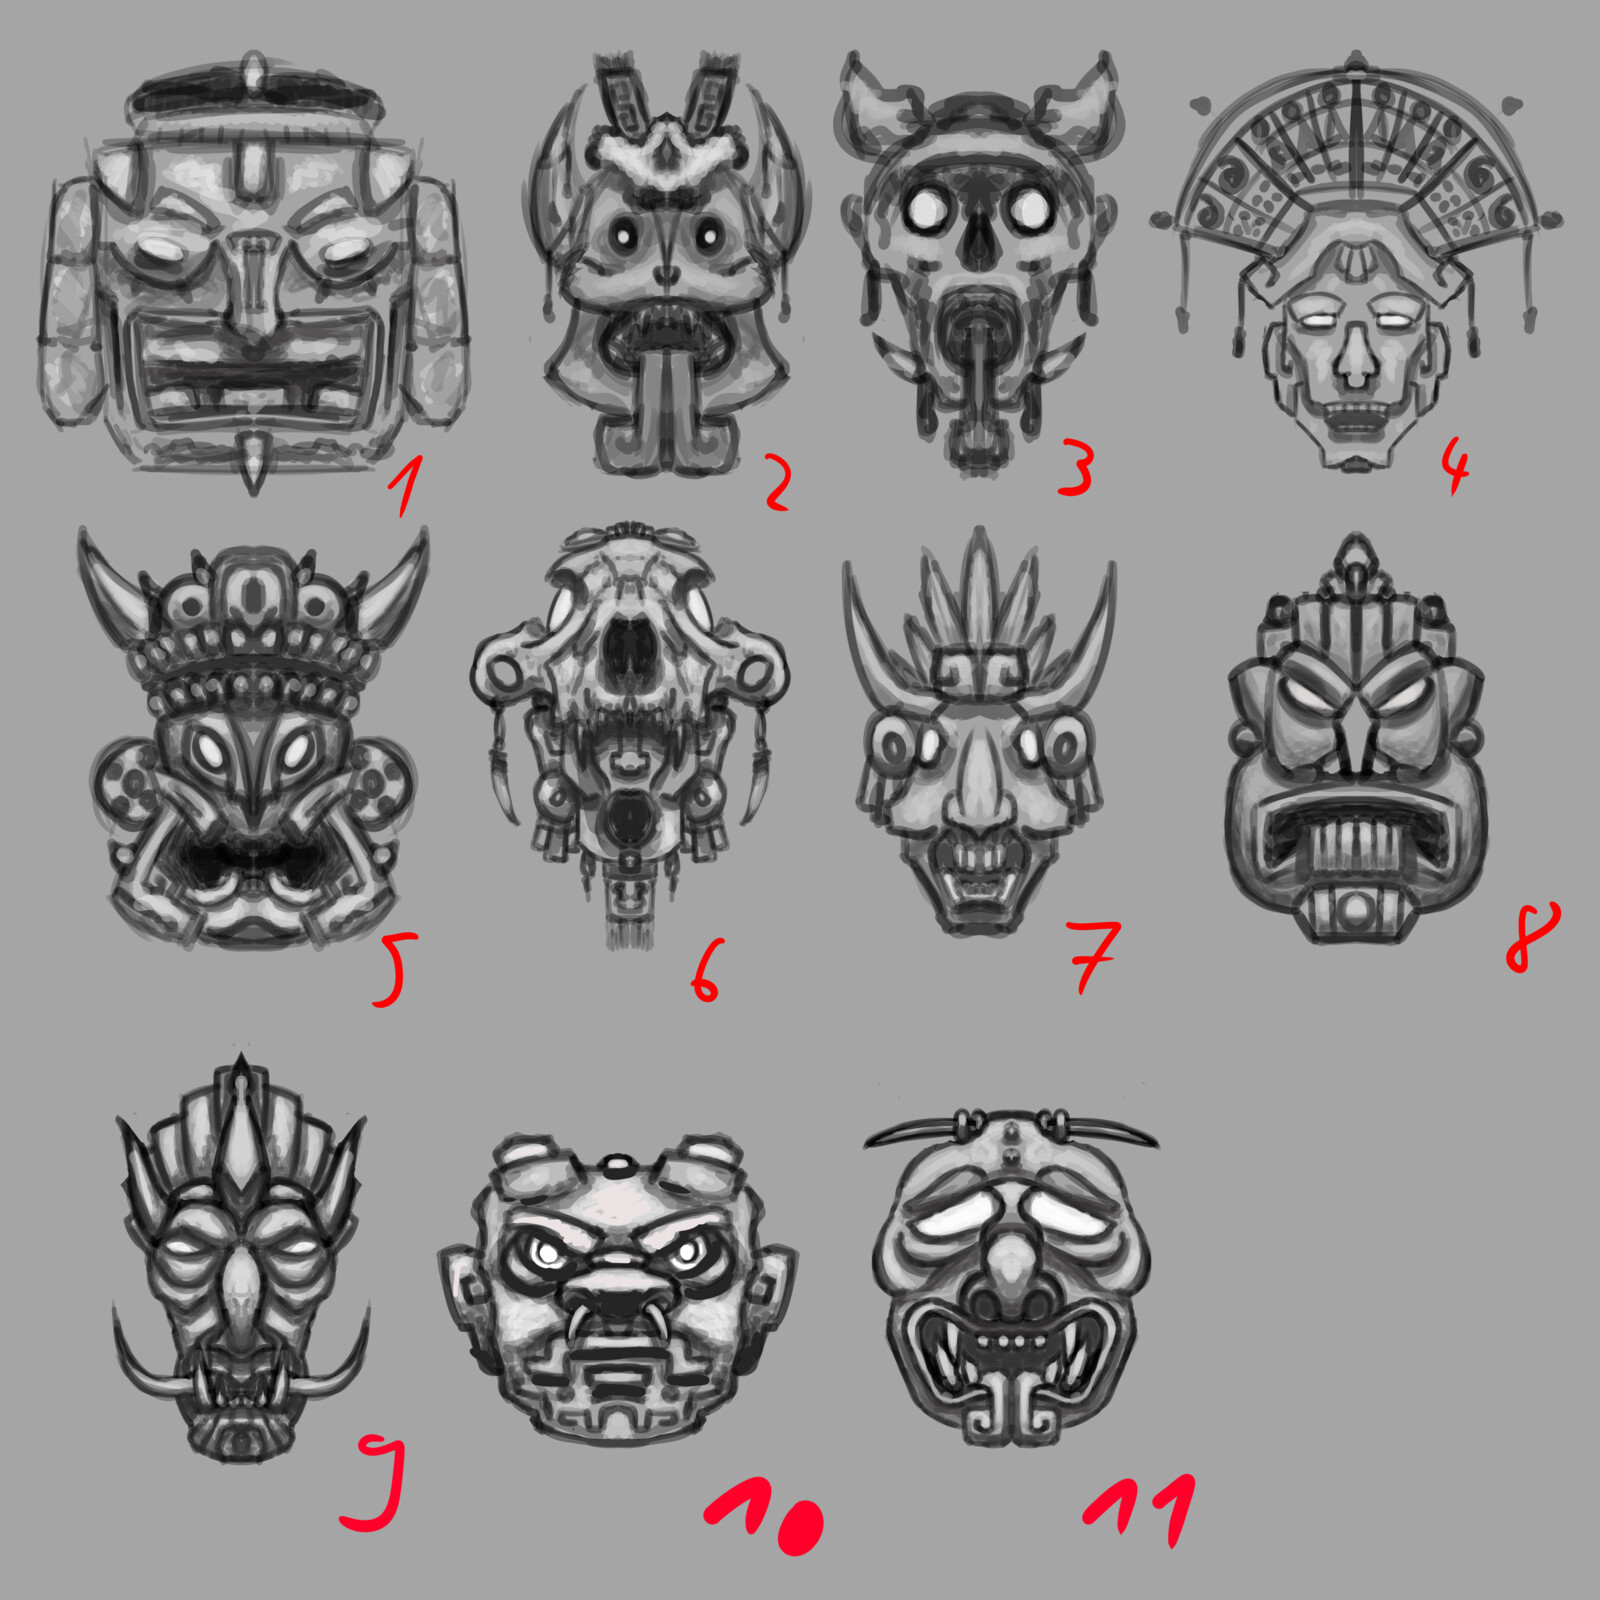 Mask Thumbnails for ideation and different kinds of golems.